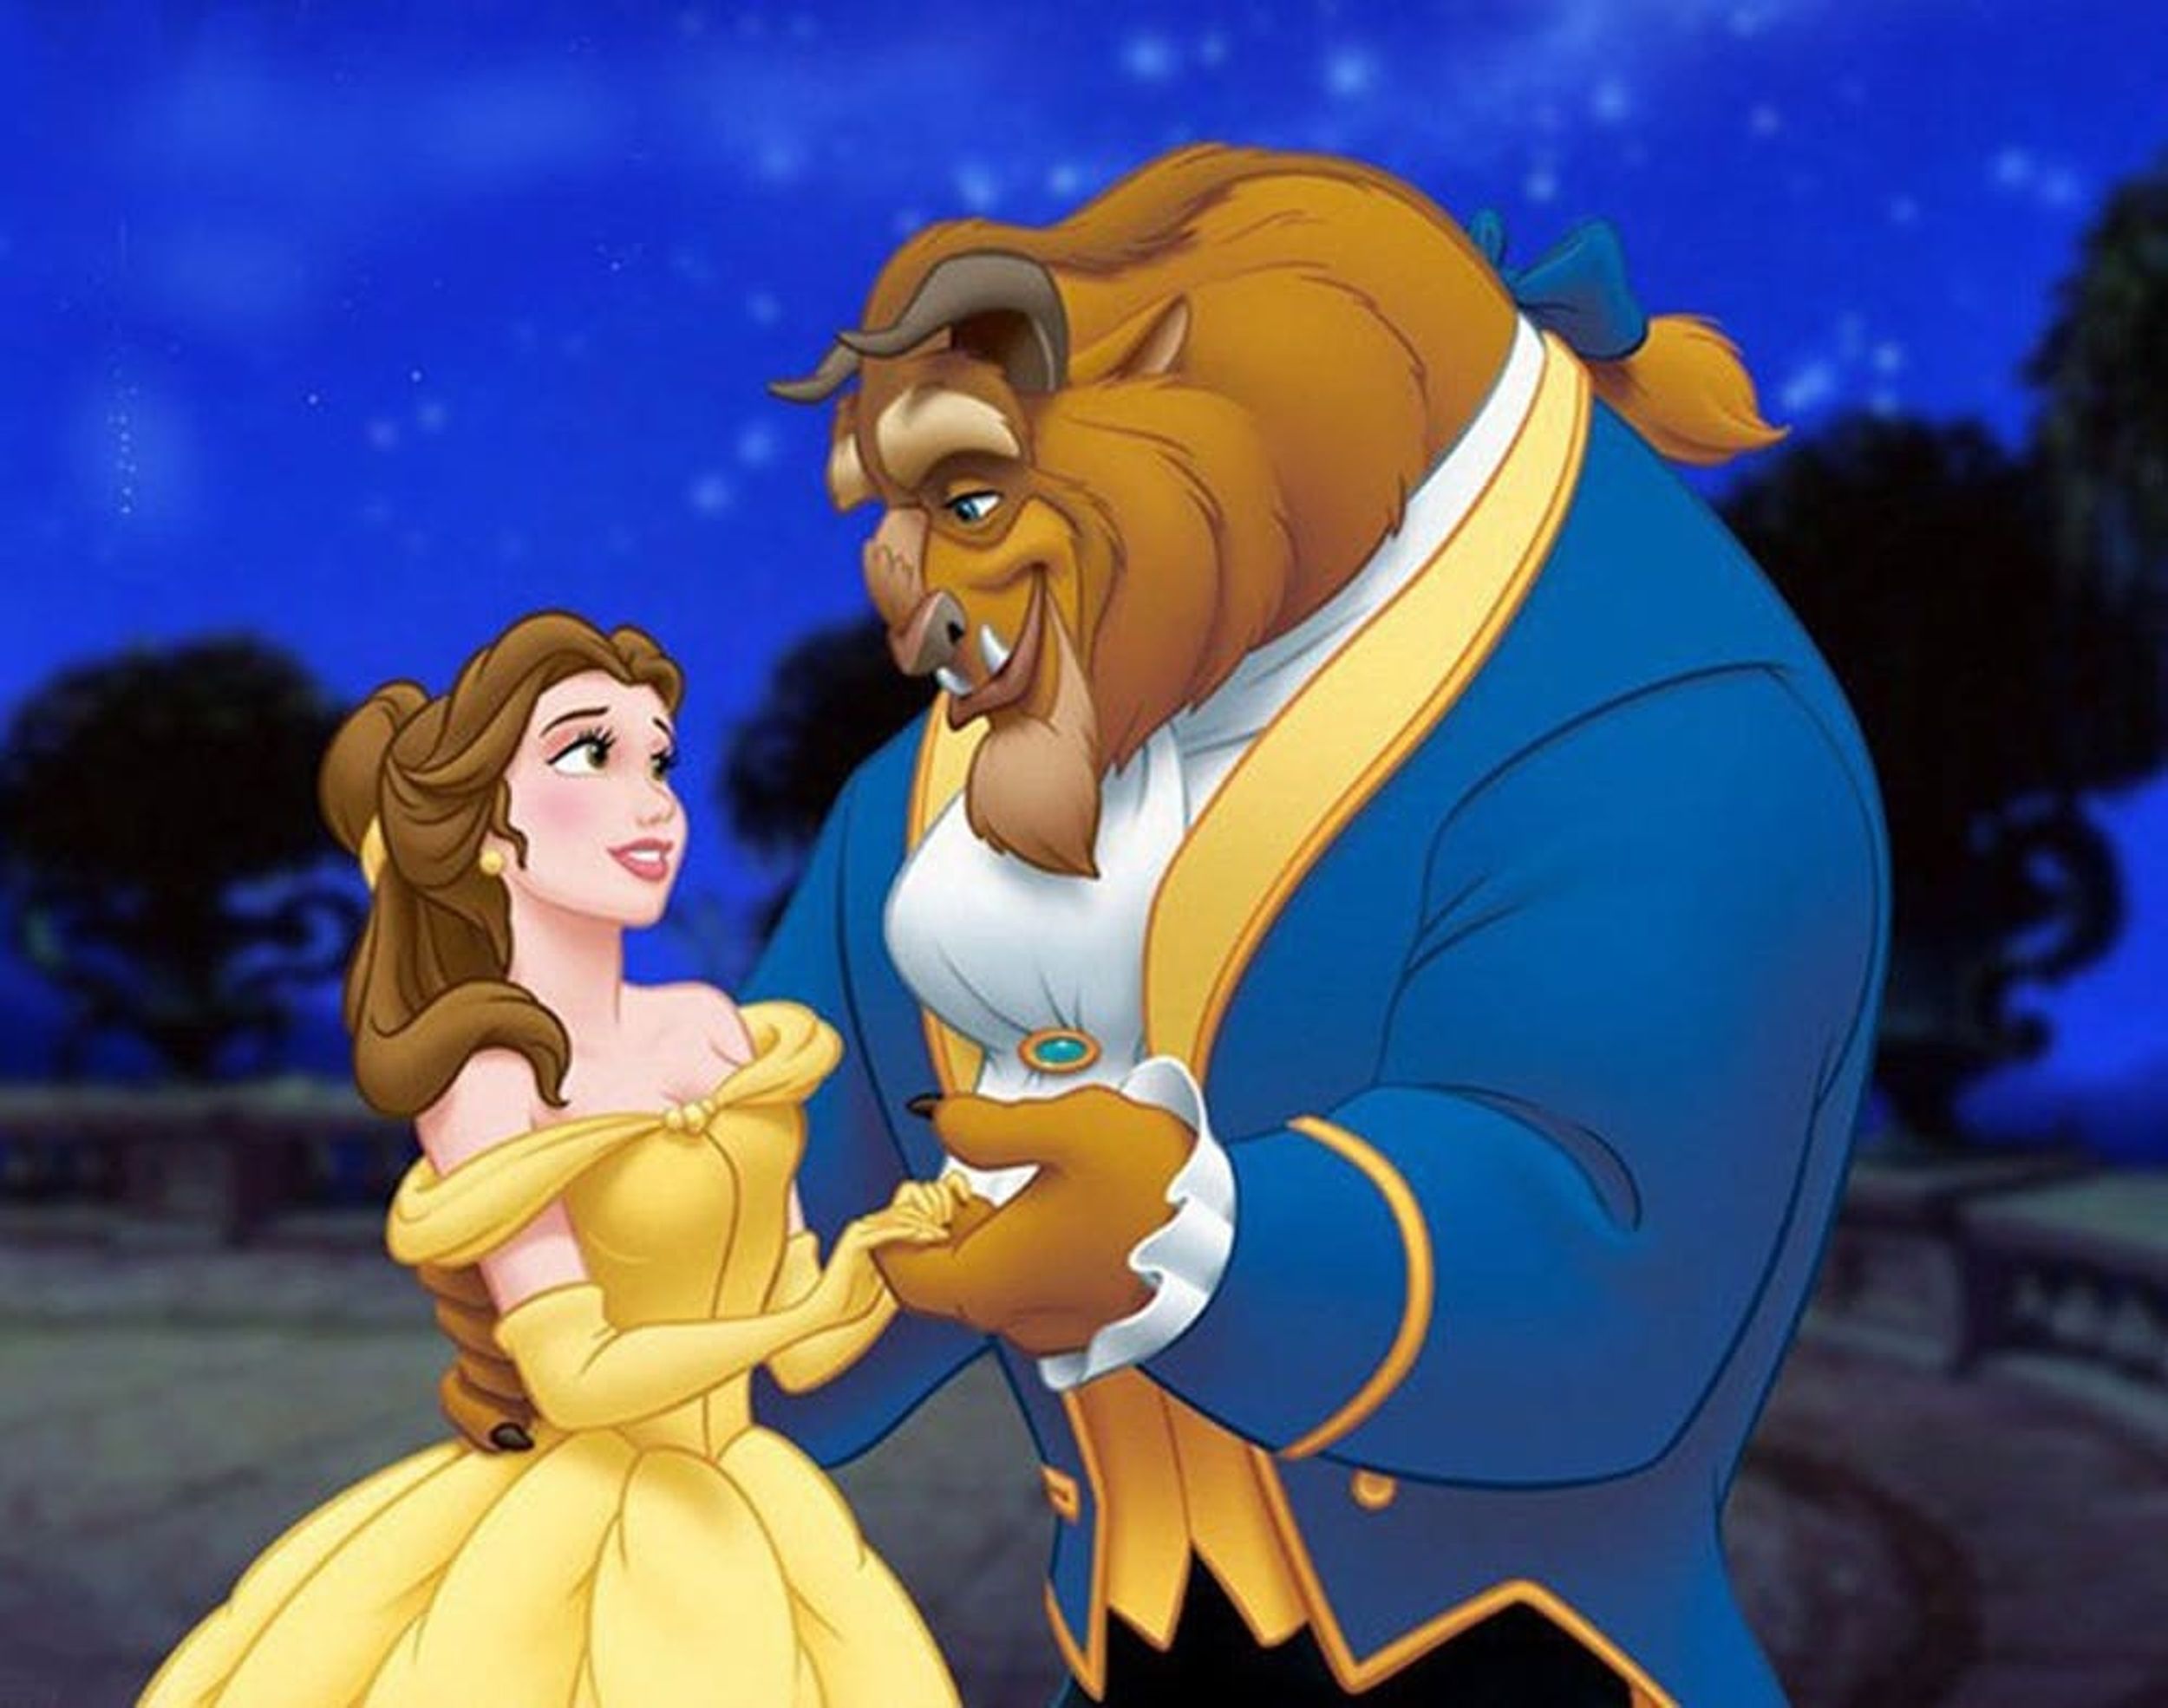 Belle + Beast IRL? Yes! Disney Is Remaking Beauty and the Beast